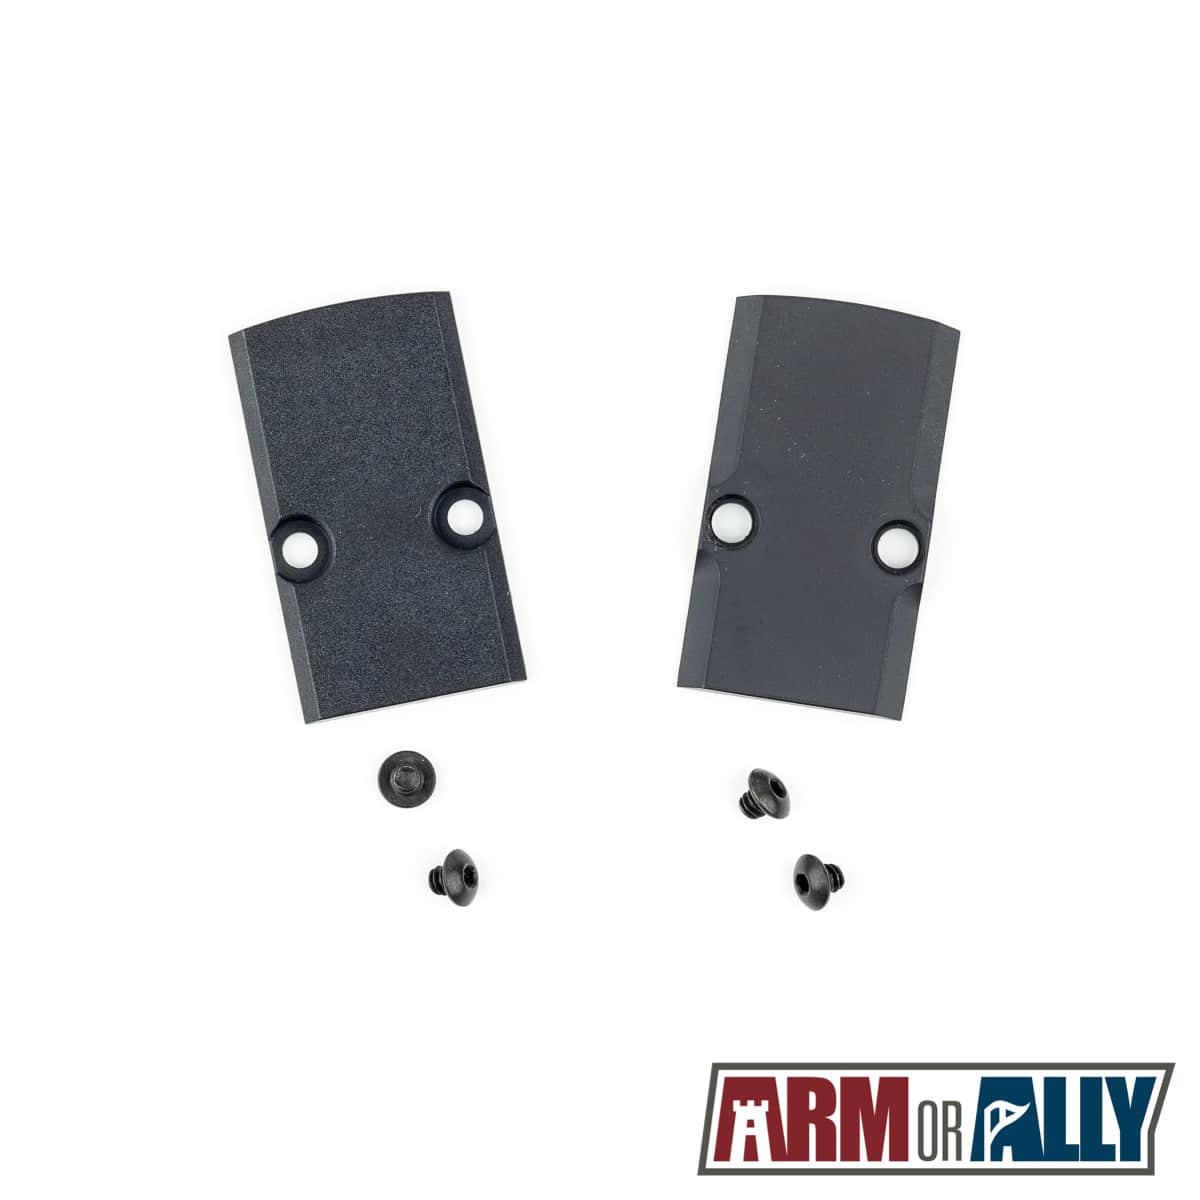 Featured image for “Optic Cover Plate - RMR & RMS”